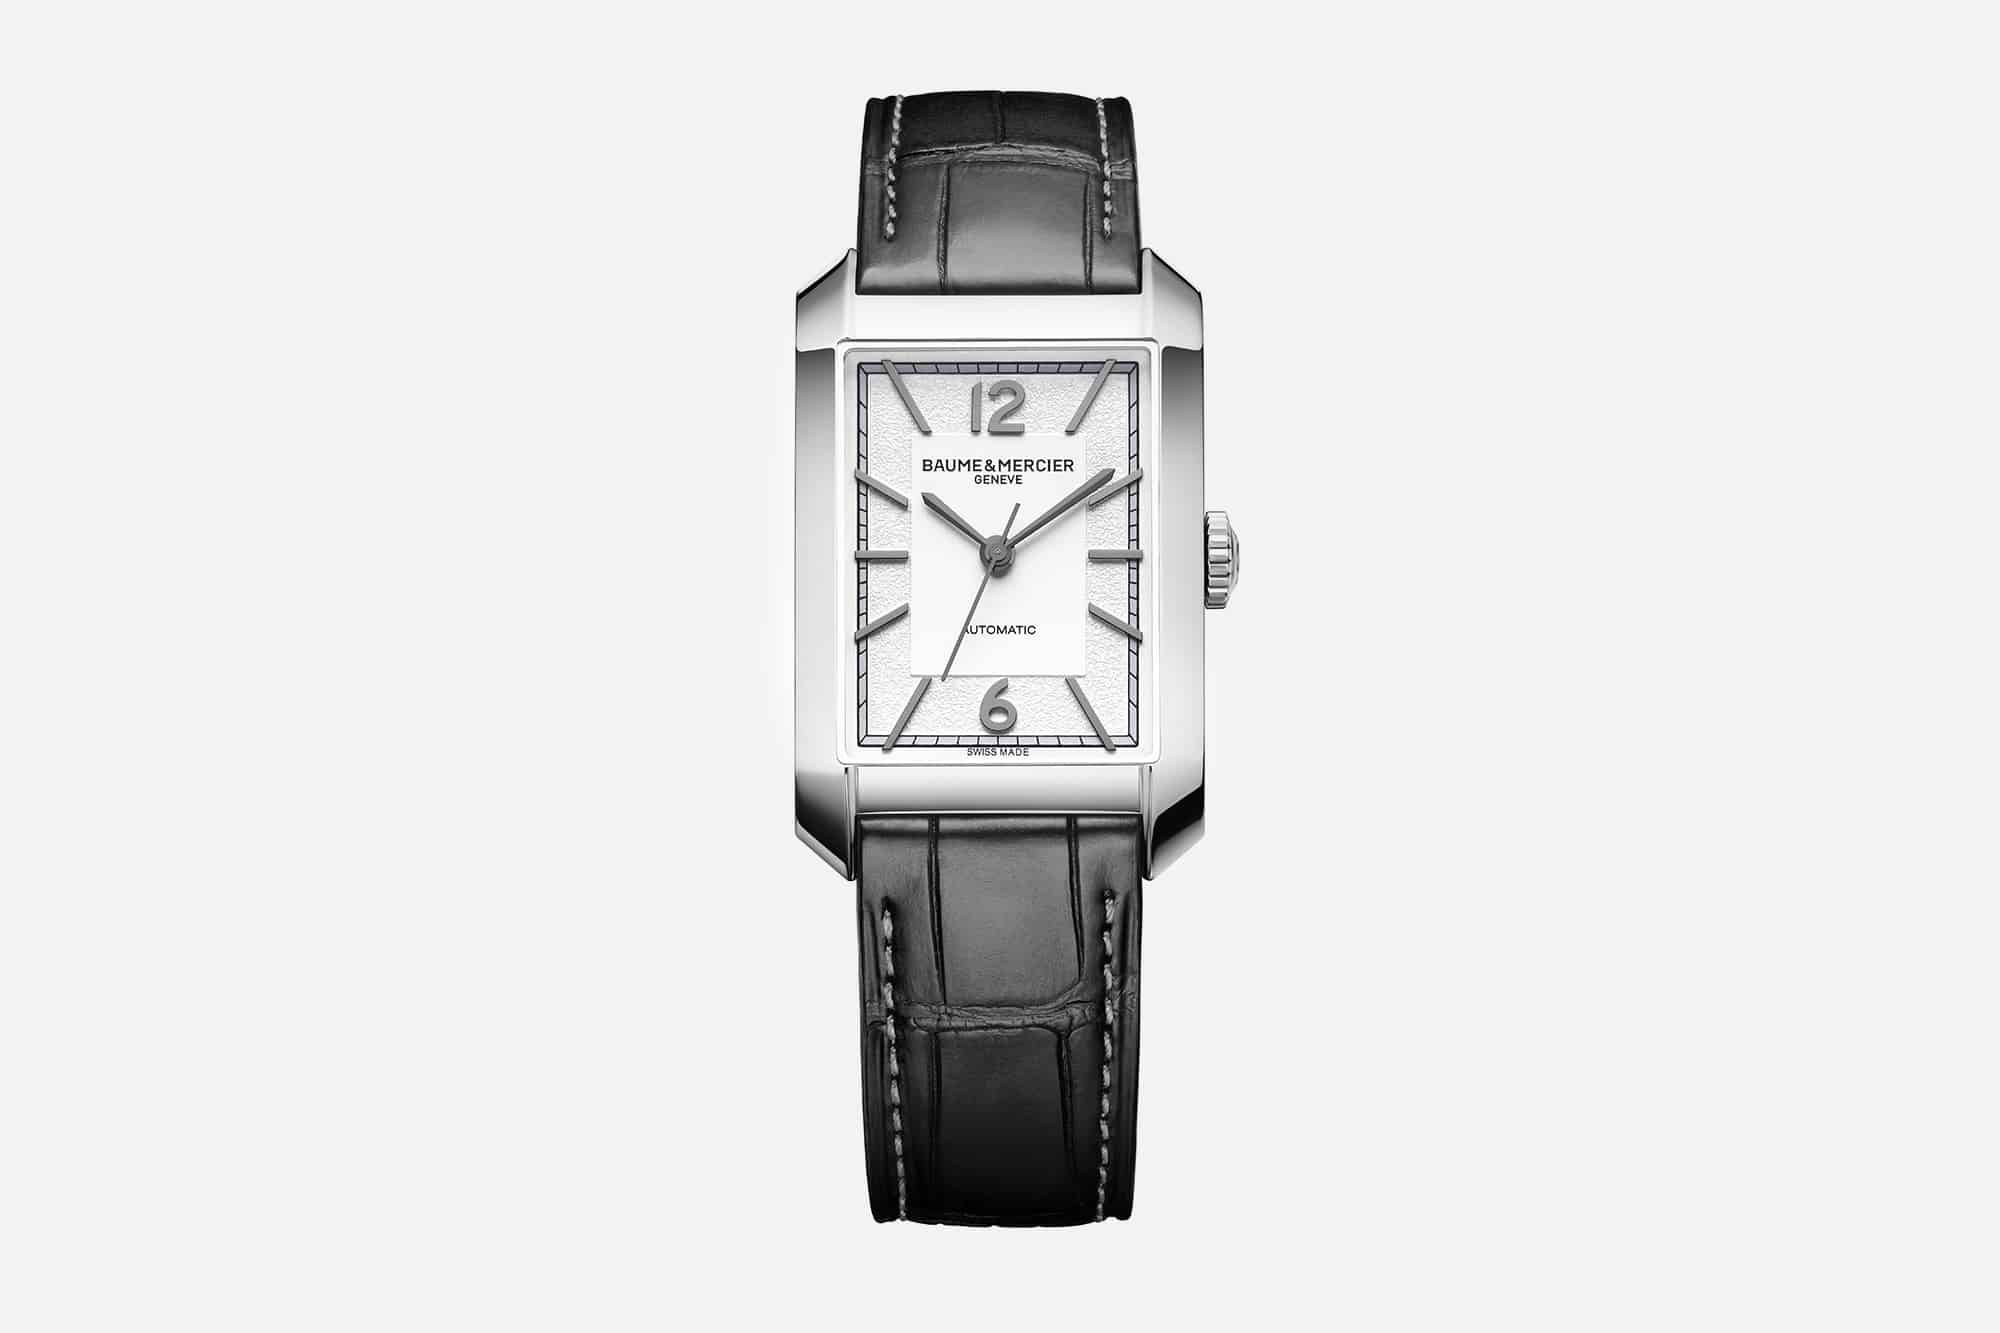 Baume & Mercier Goes Art Deco with New Watches in the Hampton Collection